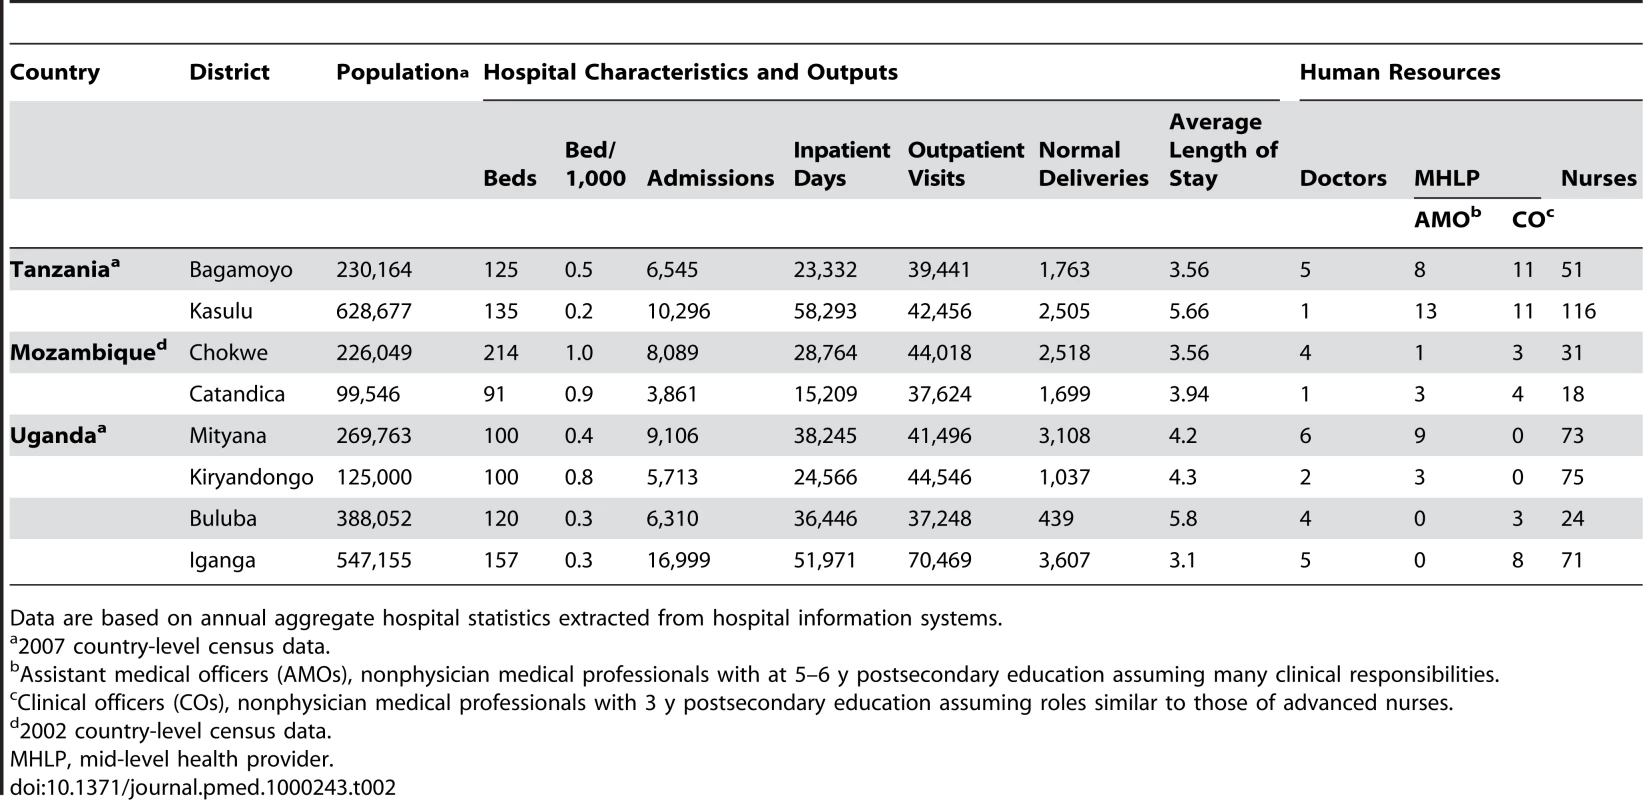 Characteristics, outputs, and human resources for eight district hospitals in Tanzania, Mozambique, and Uganda, 2008.